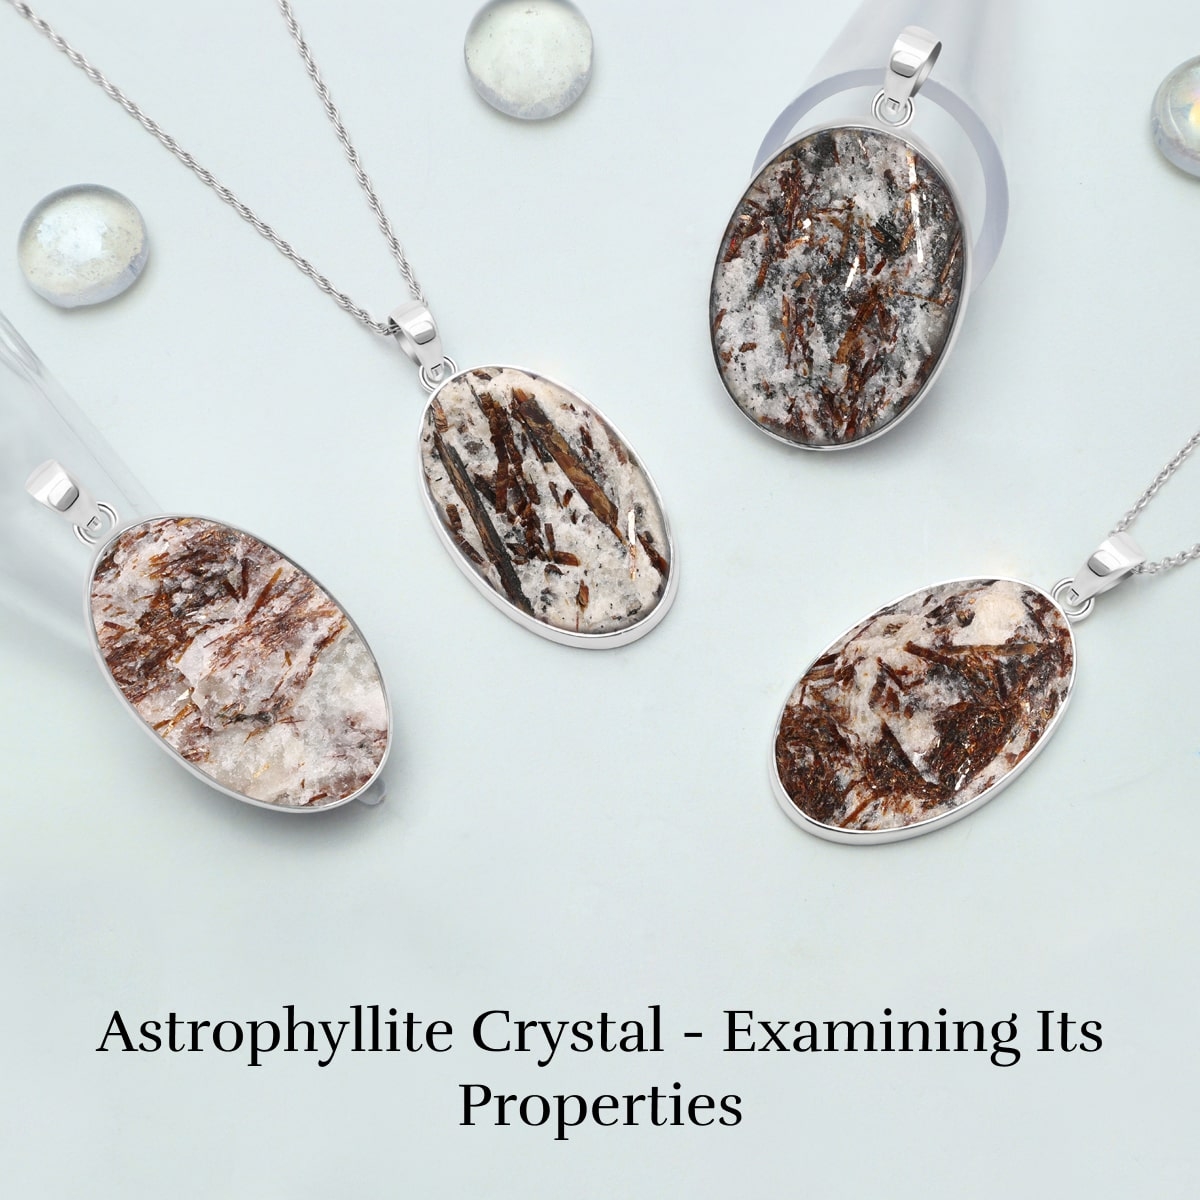 Physical Properties of Astrophyllite Crystal